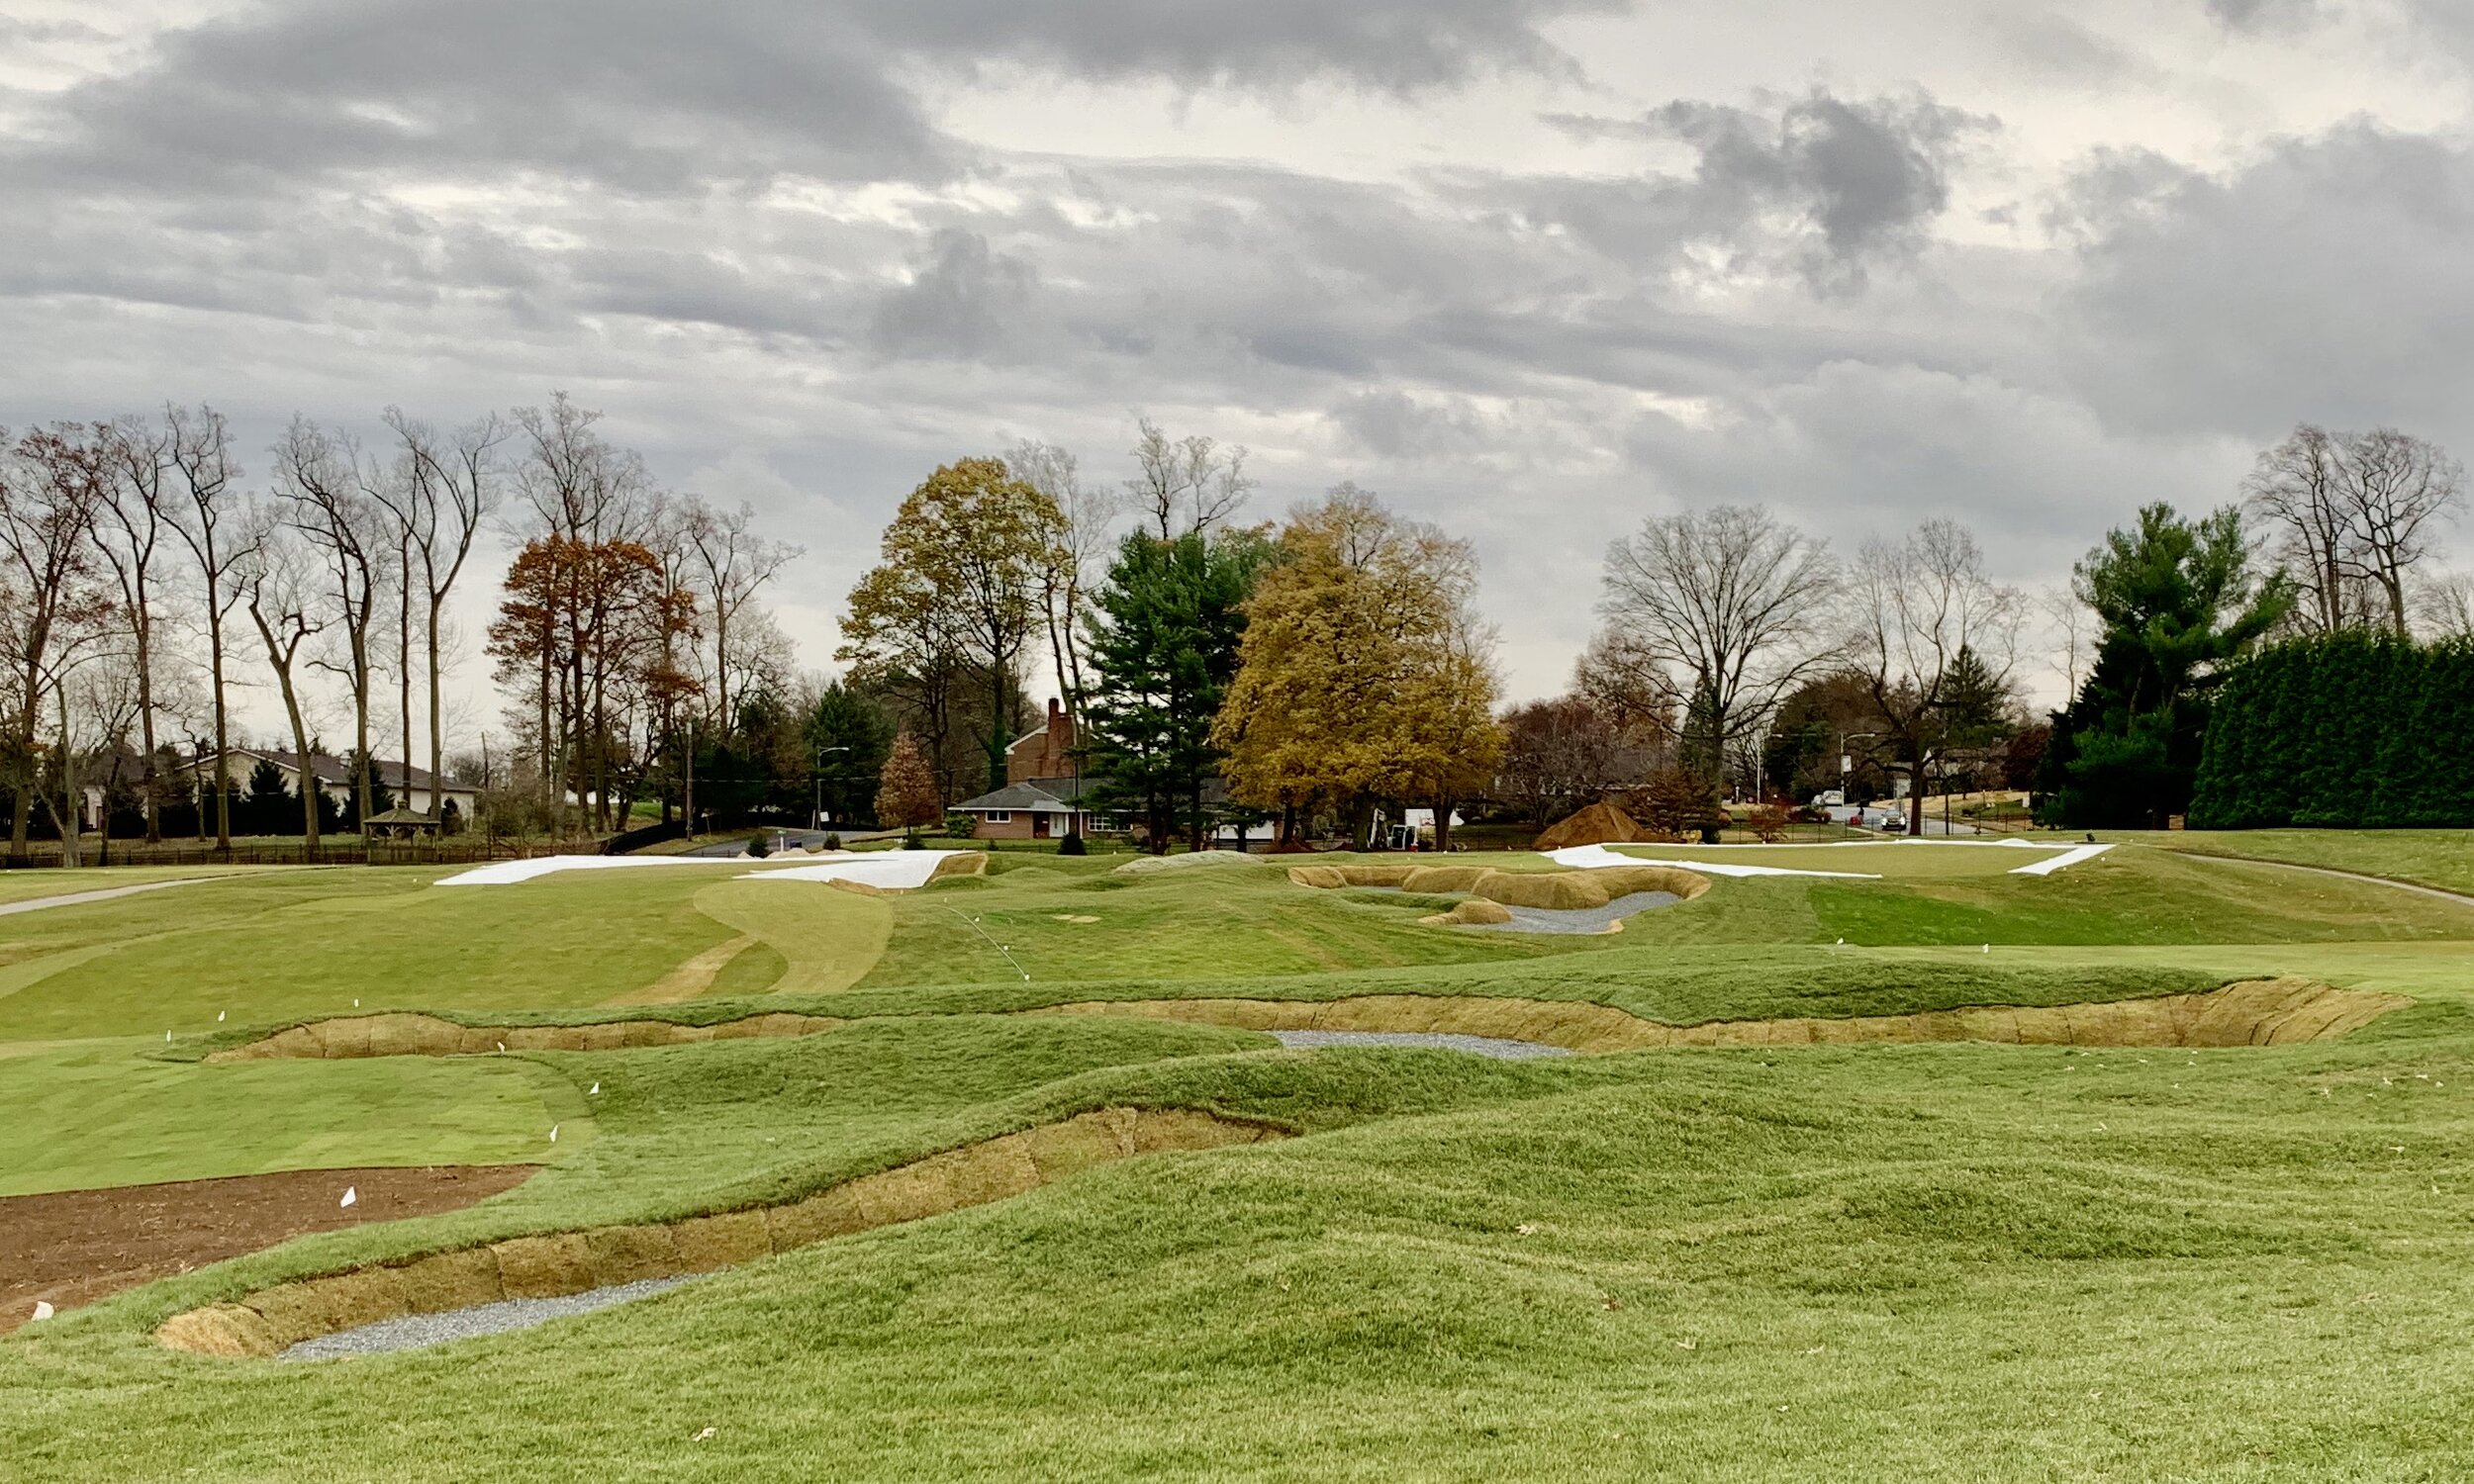 fairway mounding and bunkers between 1 and 3 fwy with 1 and 3 green in background